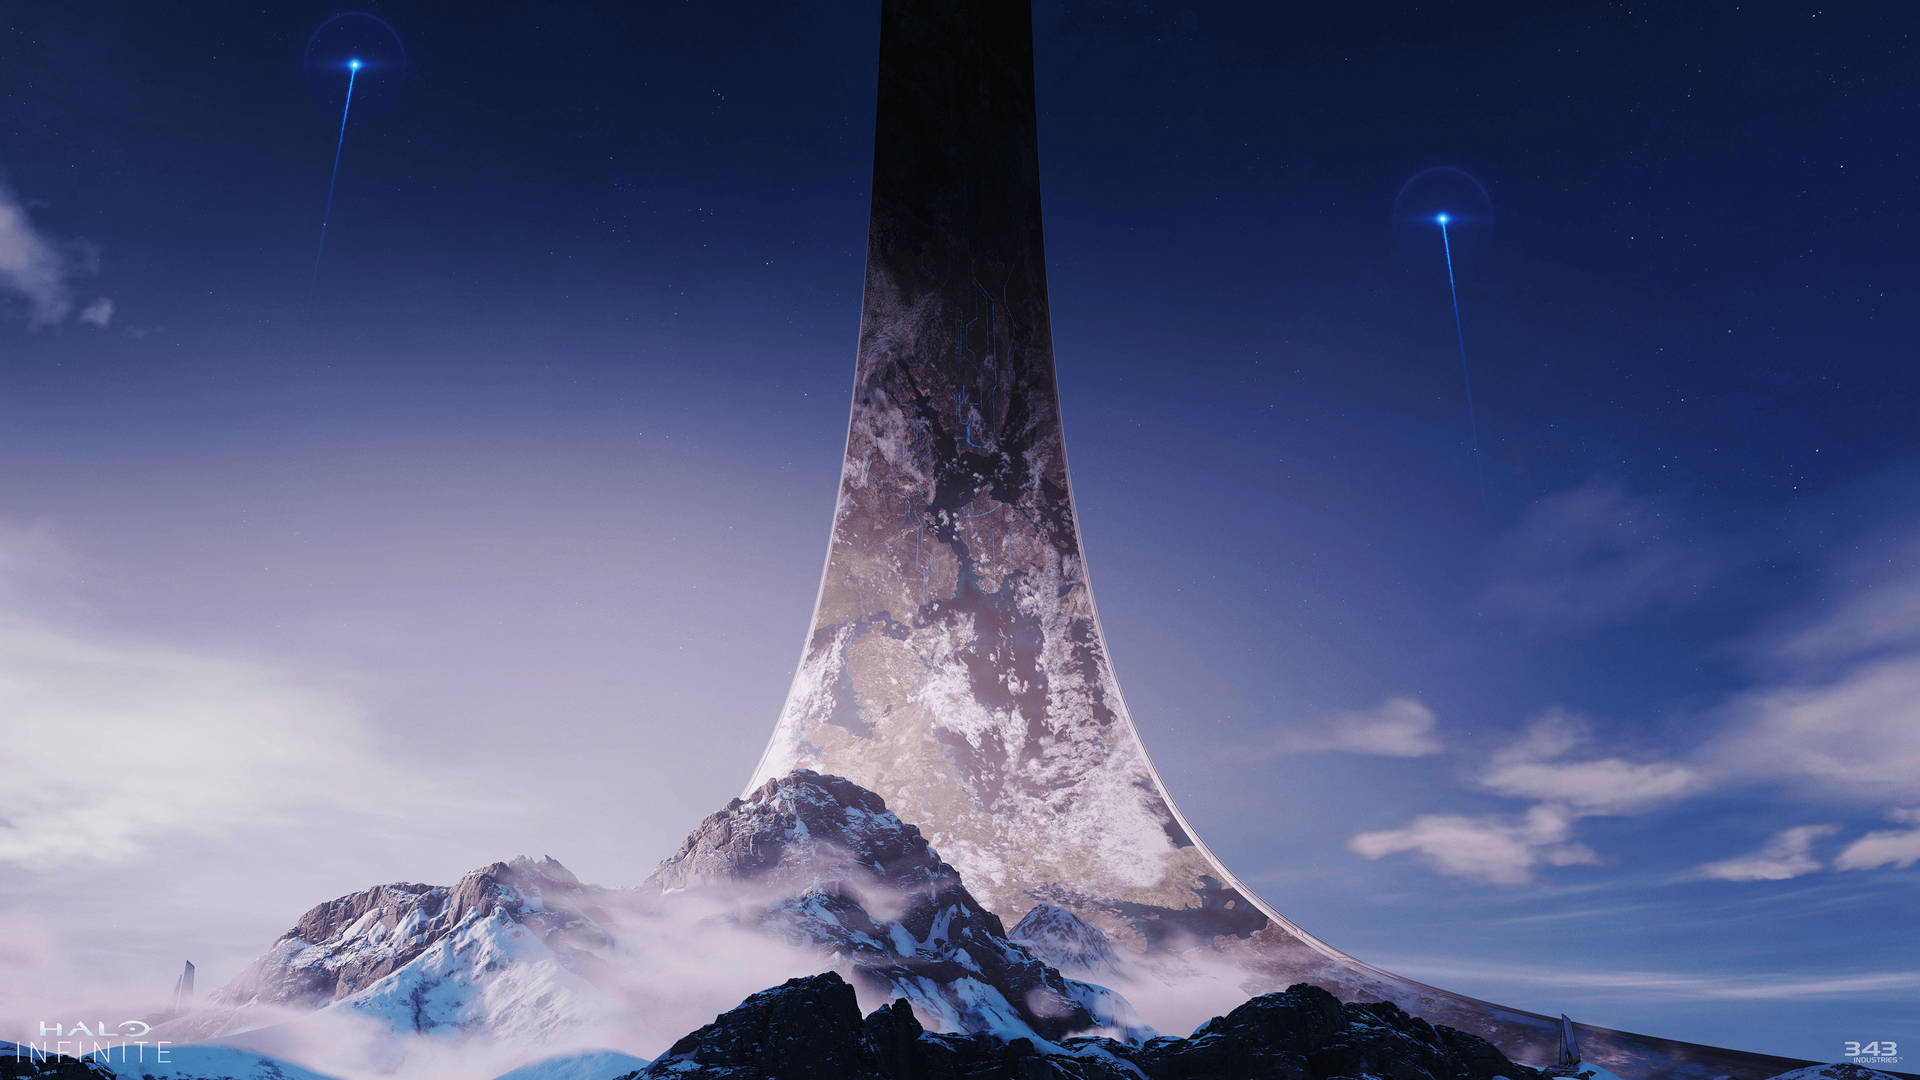 Halo Infinite 3840X2160 Wallpaper and Background Image